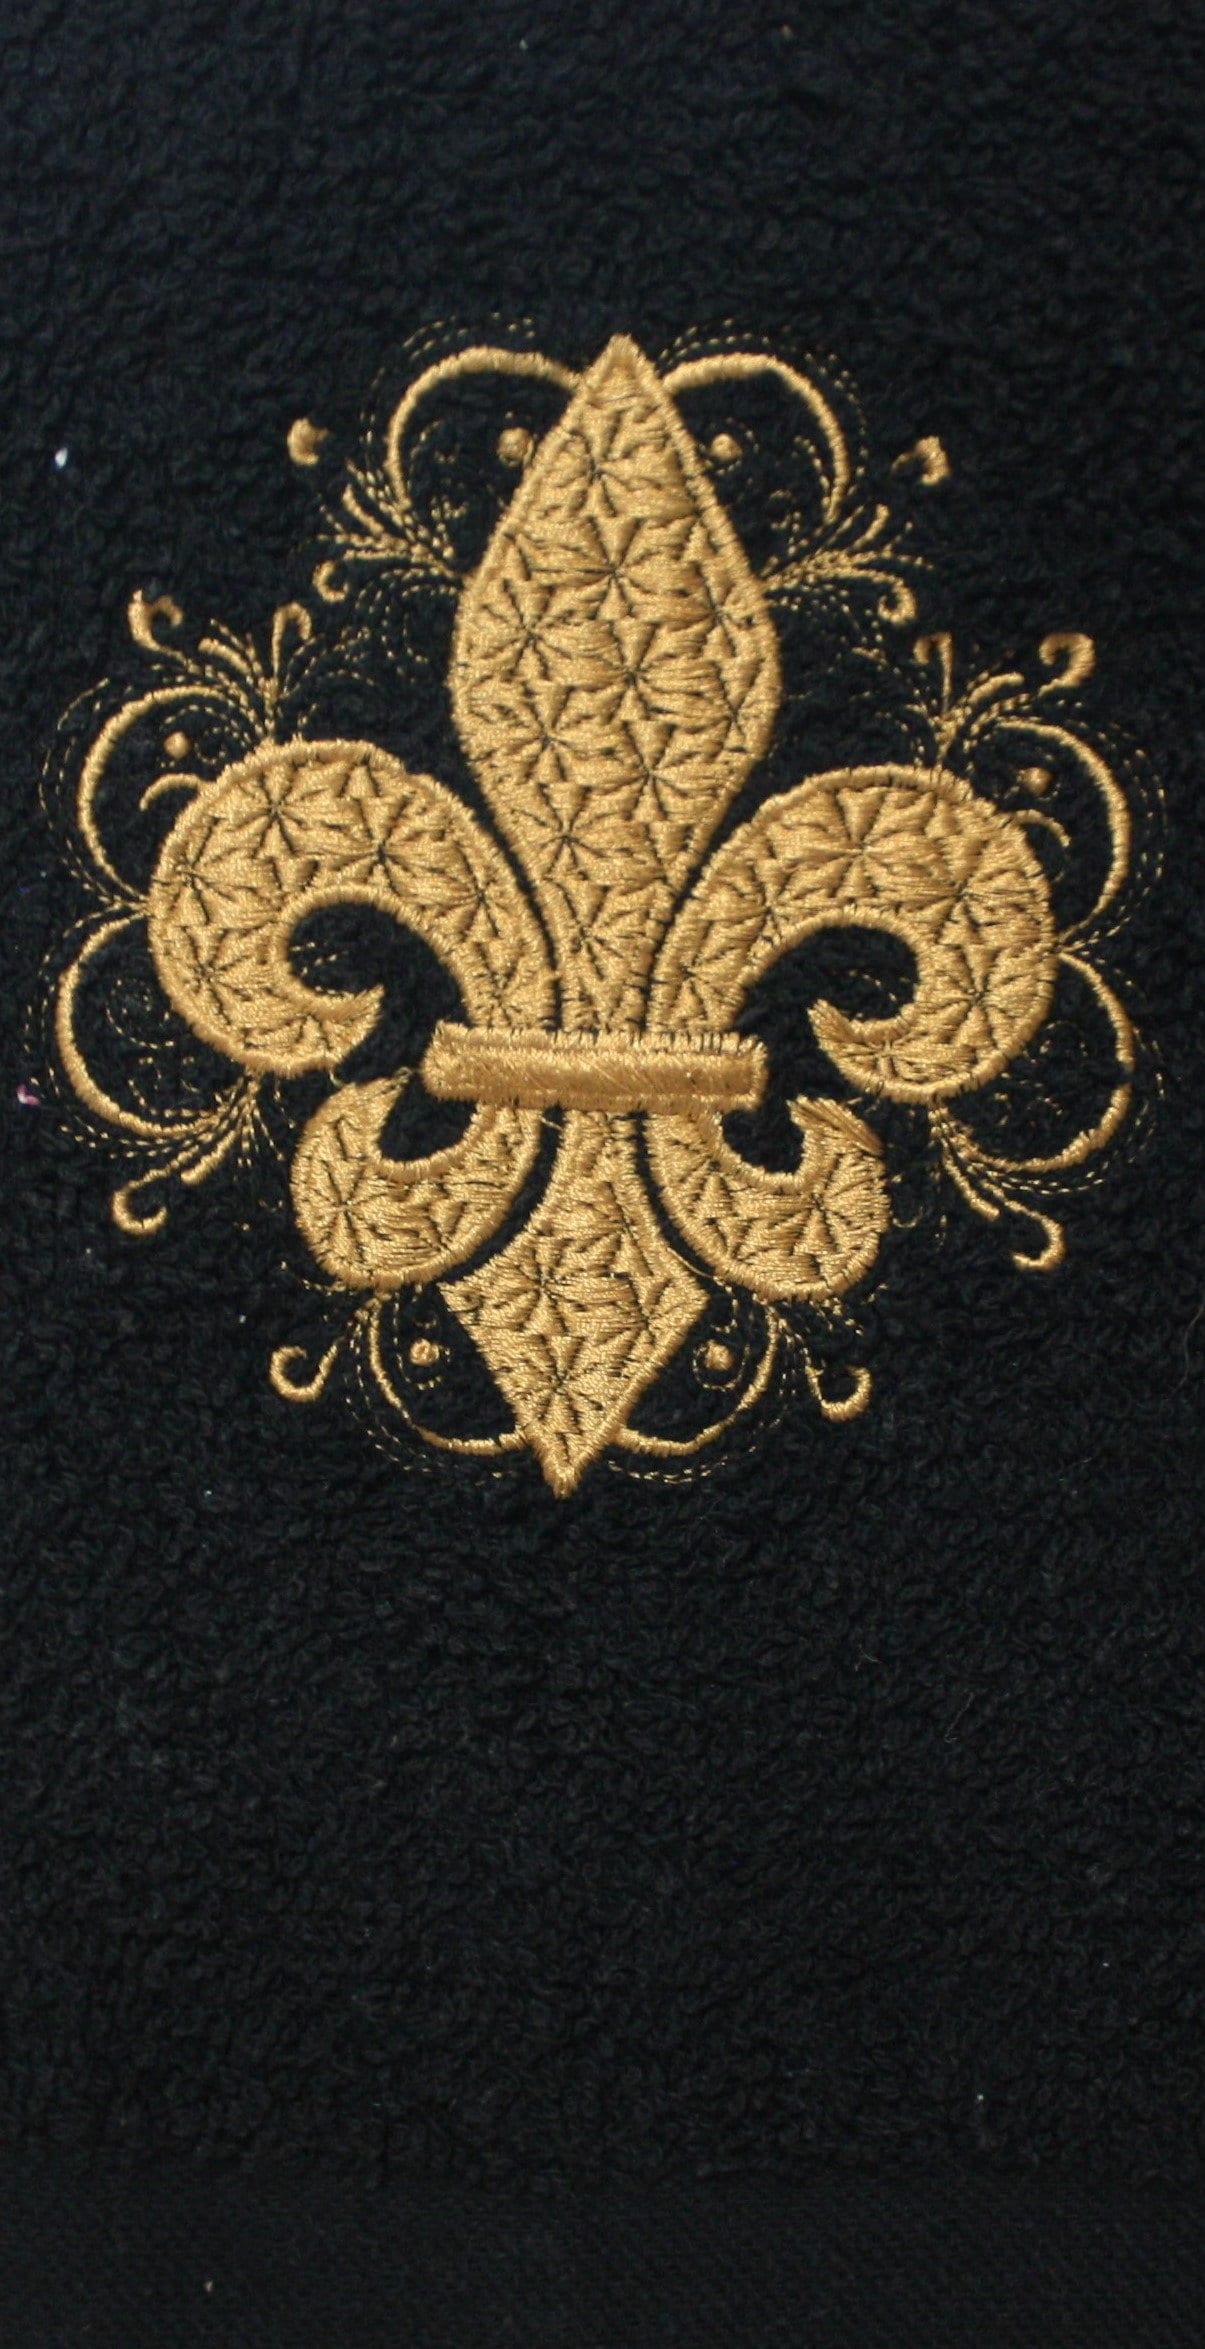 Buy Gold Fleur De Lis Wrapping Paper Sheets Home Malone, Wedding